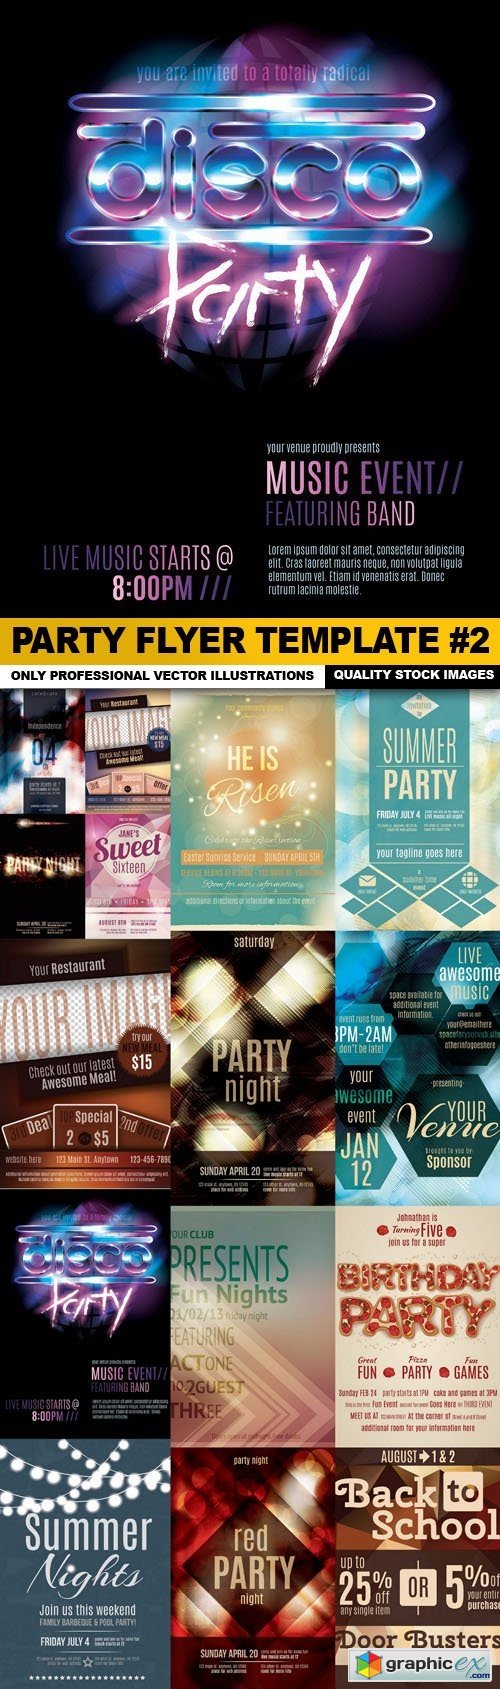 Party Flyer Template #2